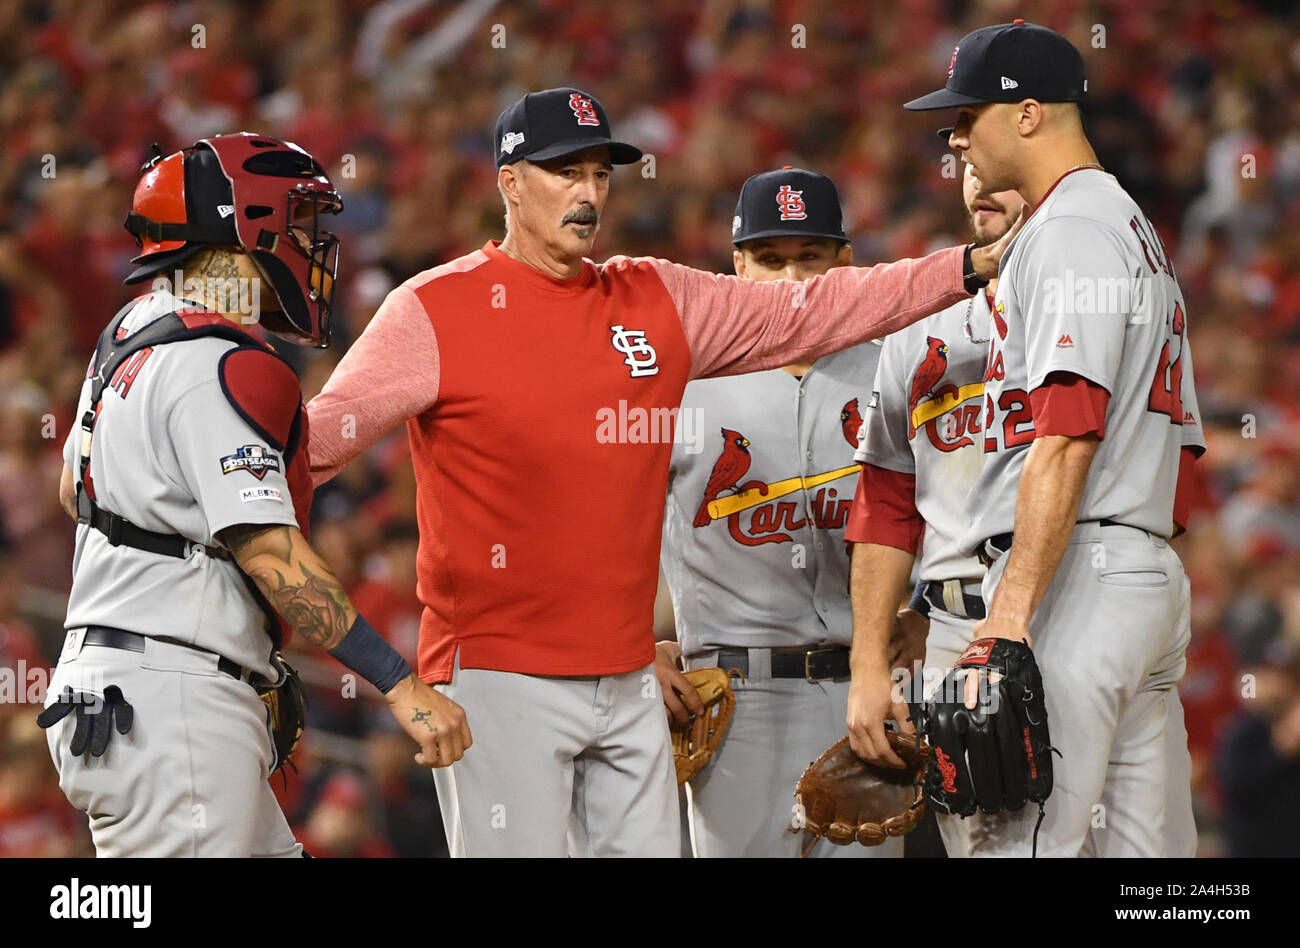 Washington, United States. 14th Oct, 2019. The St. Louis Cardinals hold a conference on the pitching mound with starter Jack Flaherty (R) during the third inning of game 3 in the NLCS at Nationals Park in Washington, DC, on Monday, October 14, 2019. Photo by Kevin Dietsch/UPI Credit: UPI/Alamy Live News Stock Photo